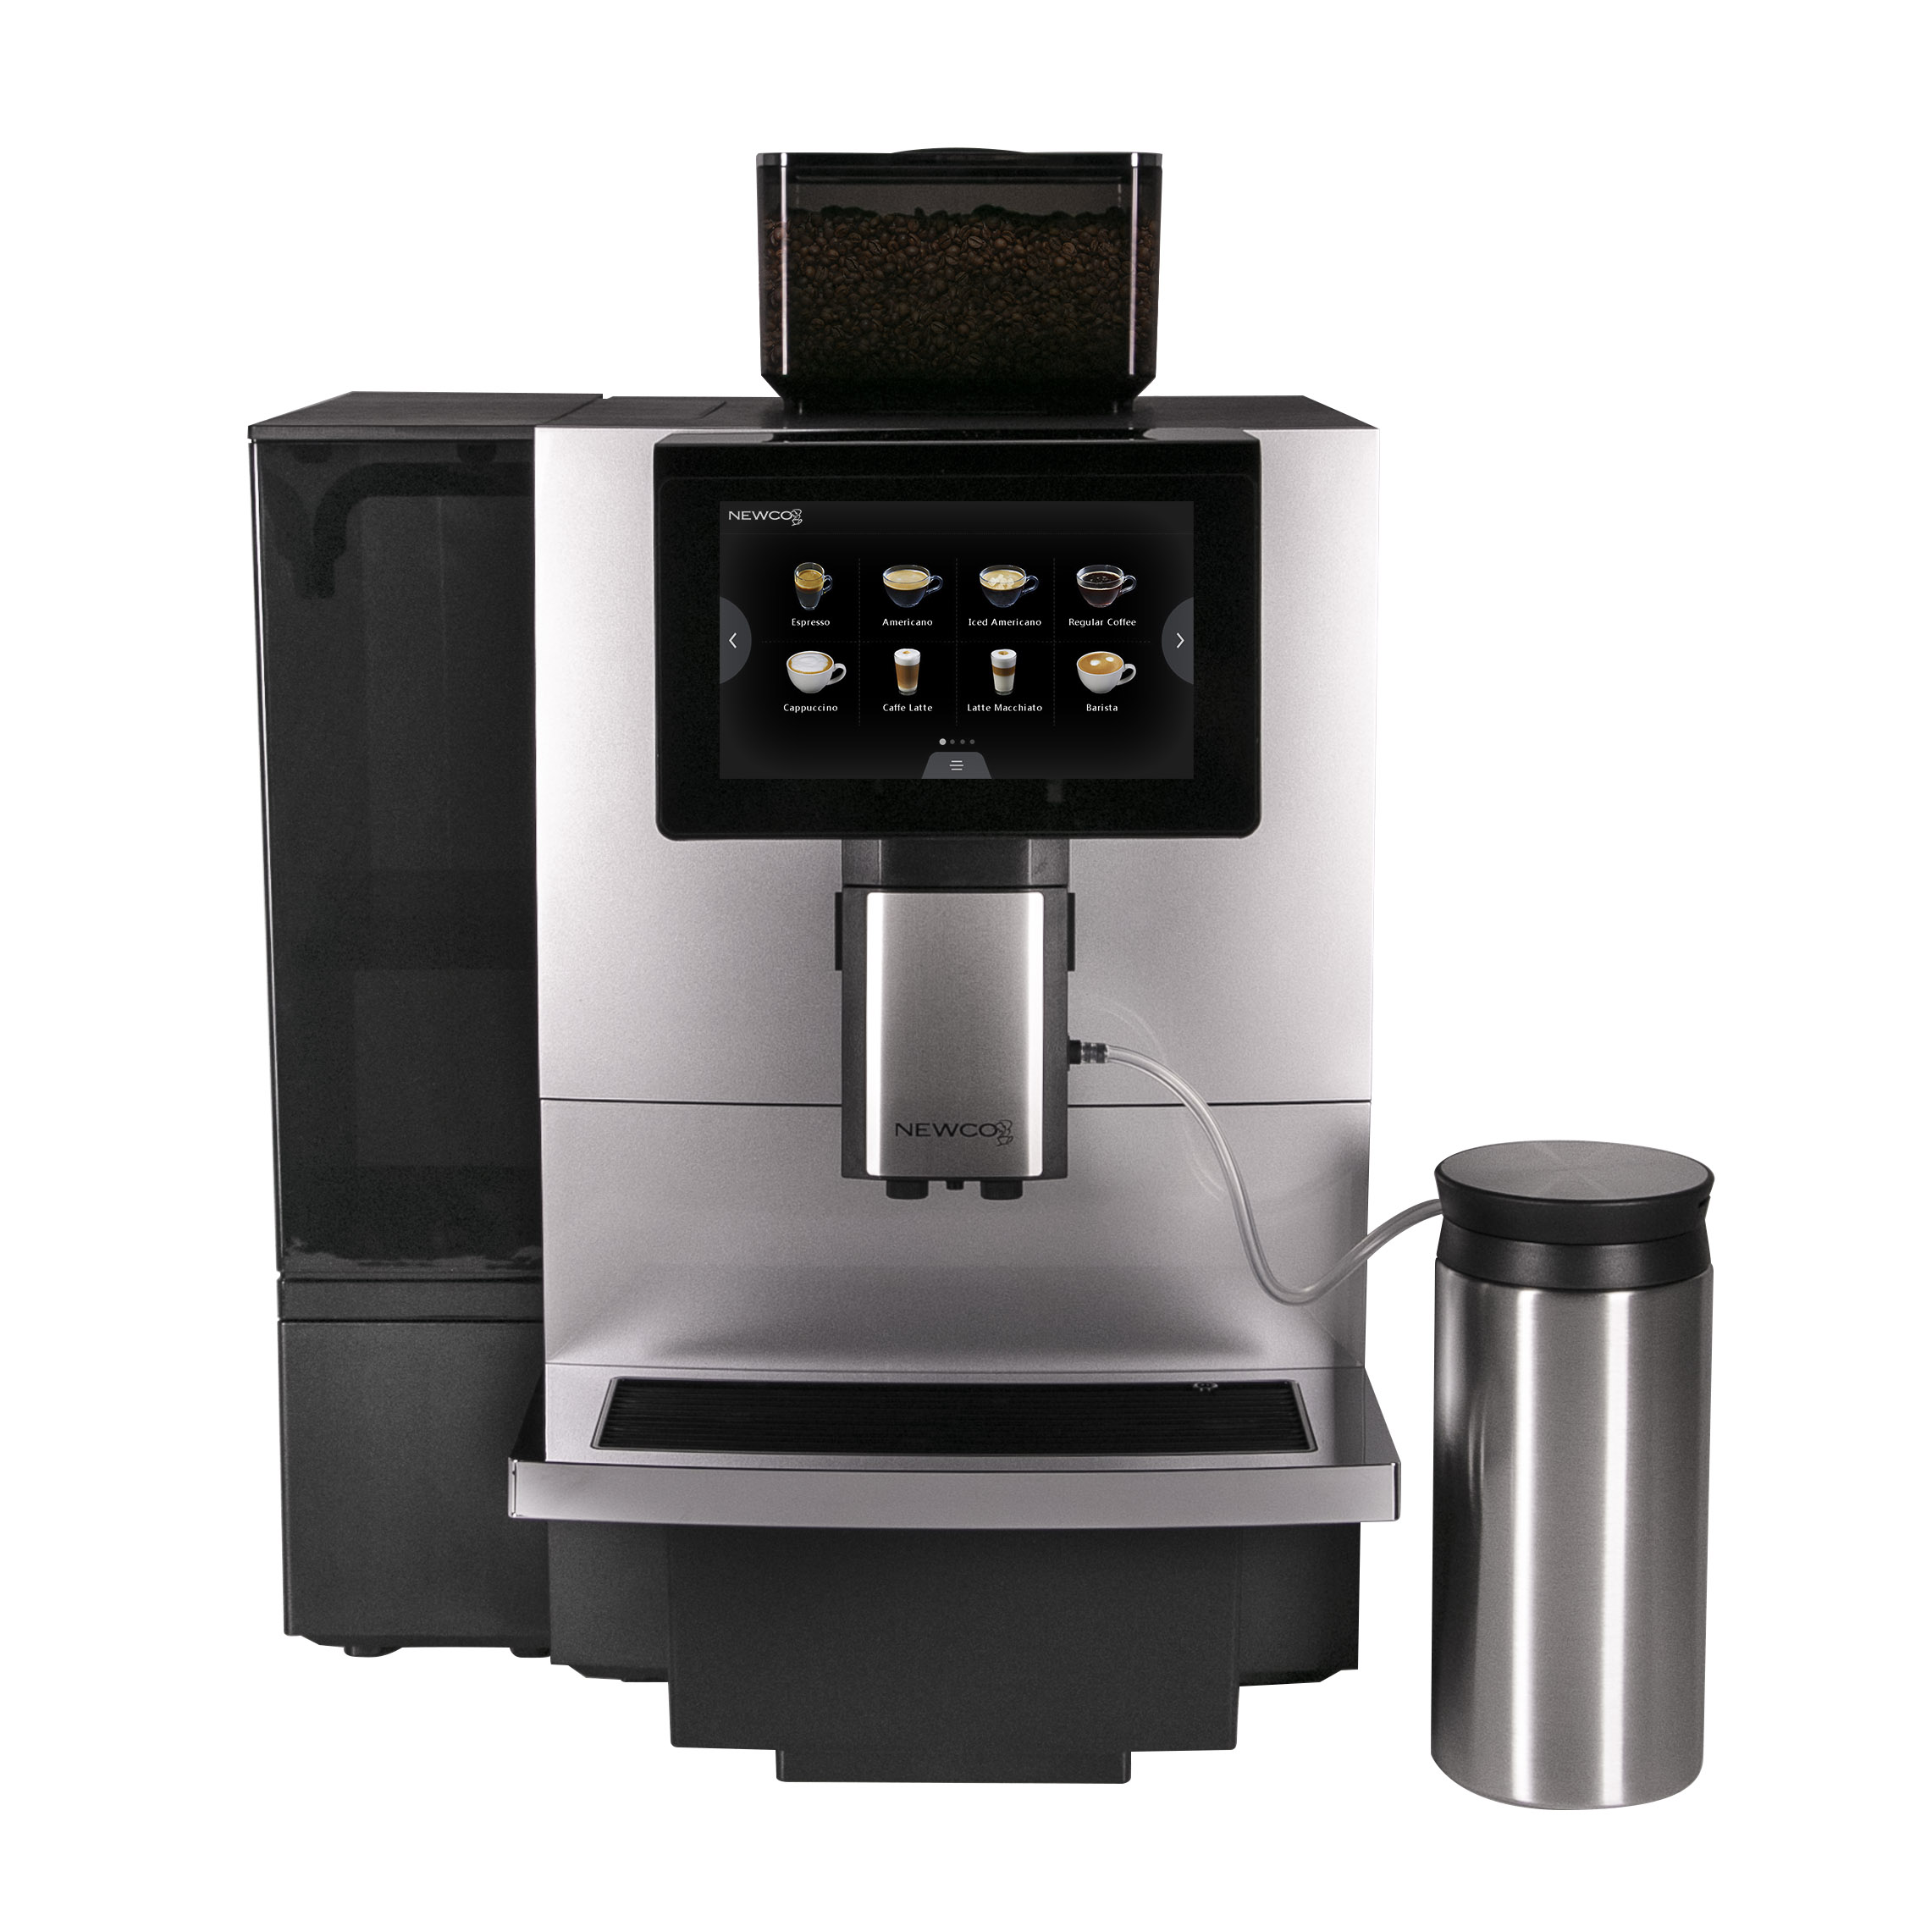 What features should I look for in an iced latte machine? 